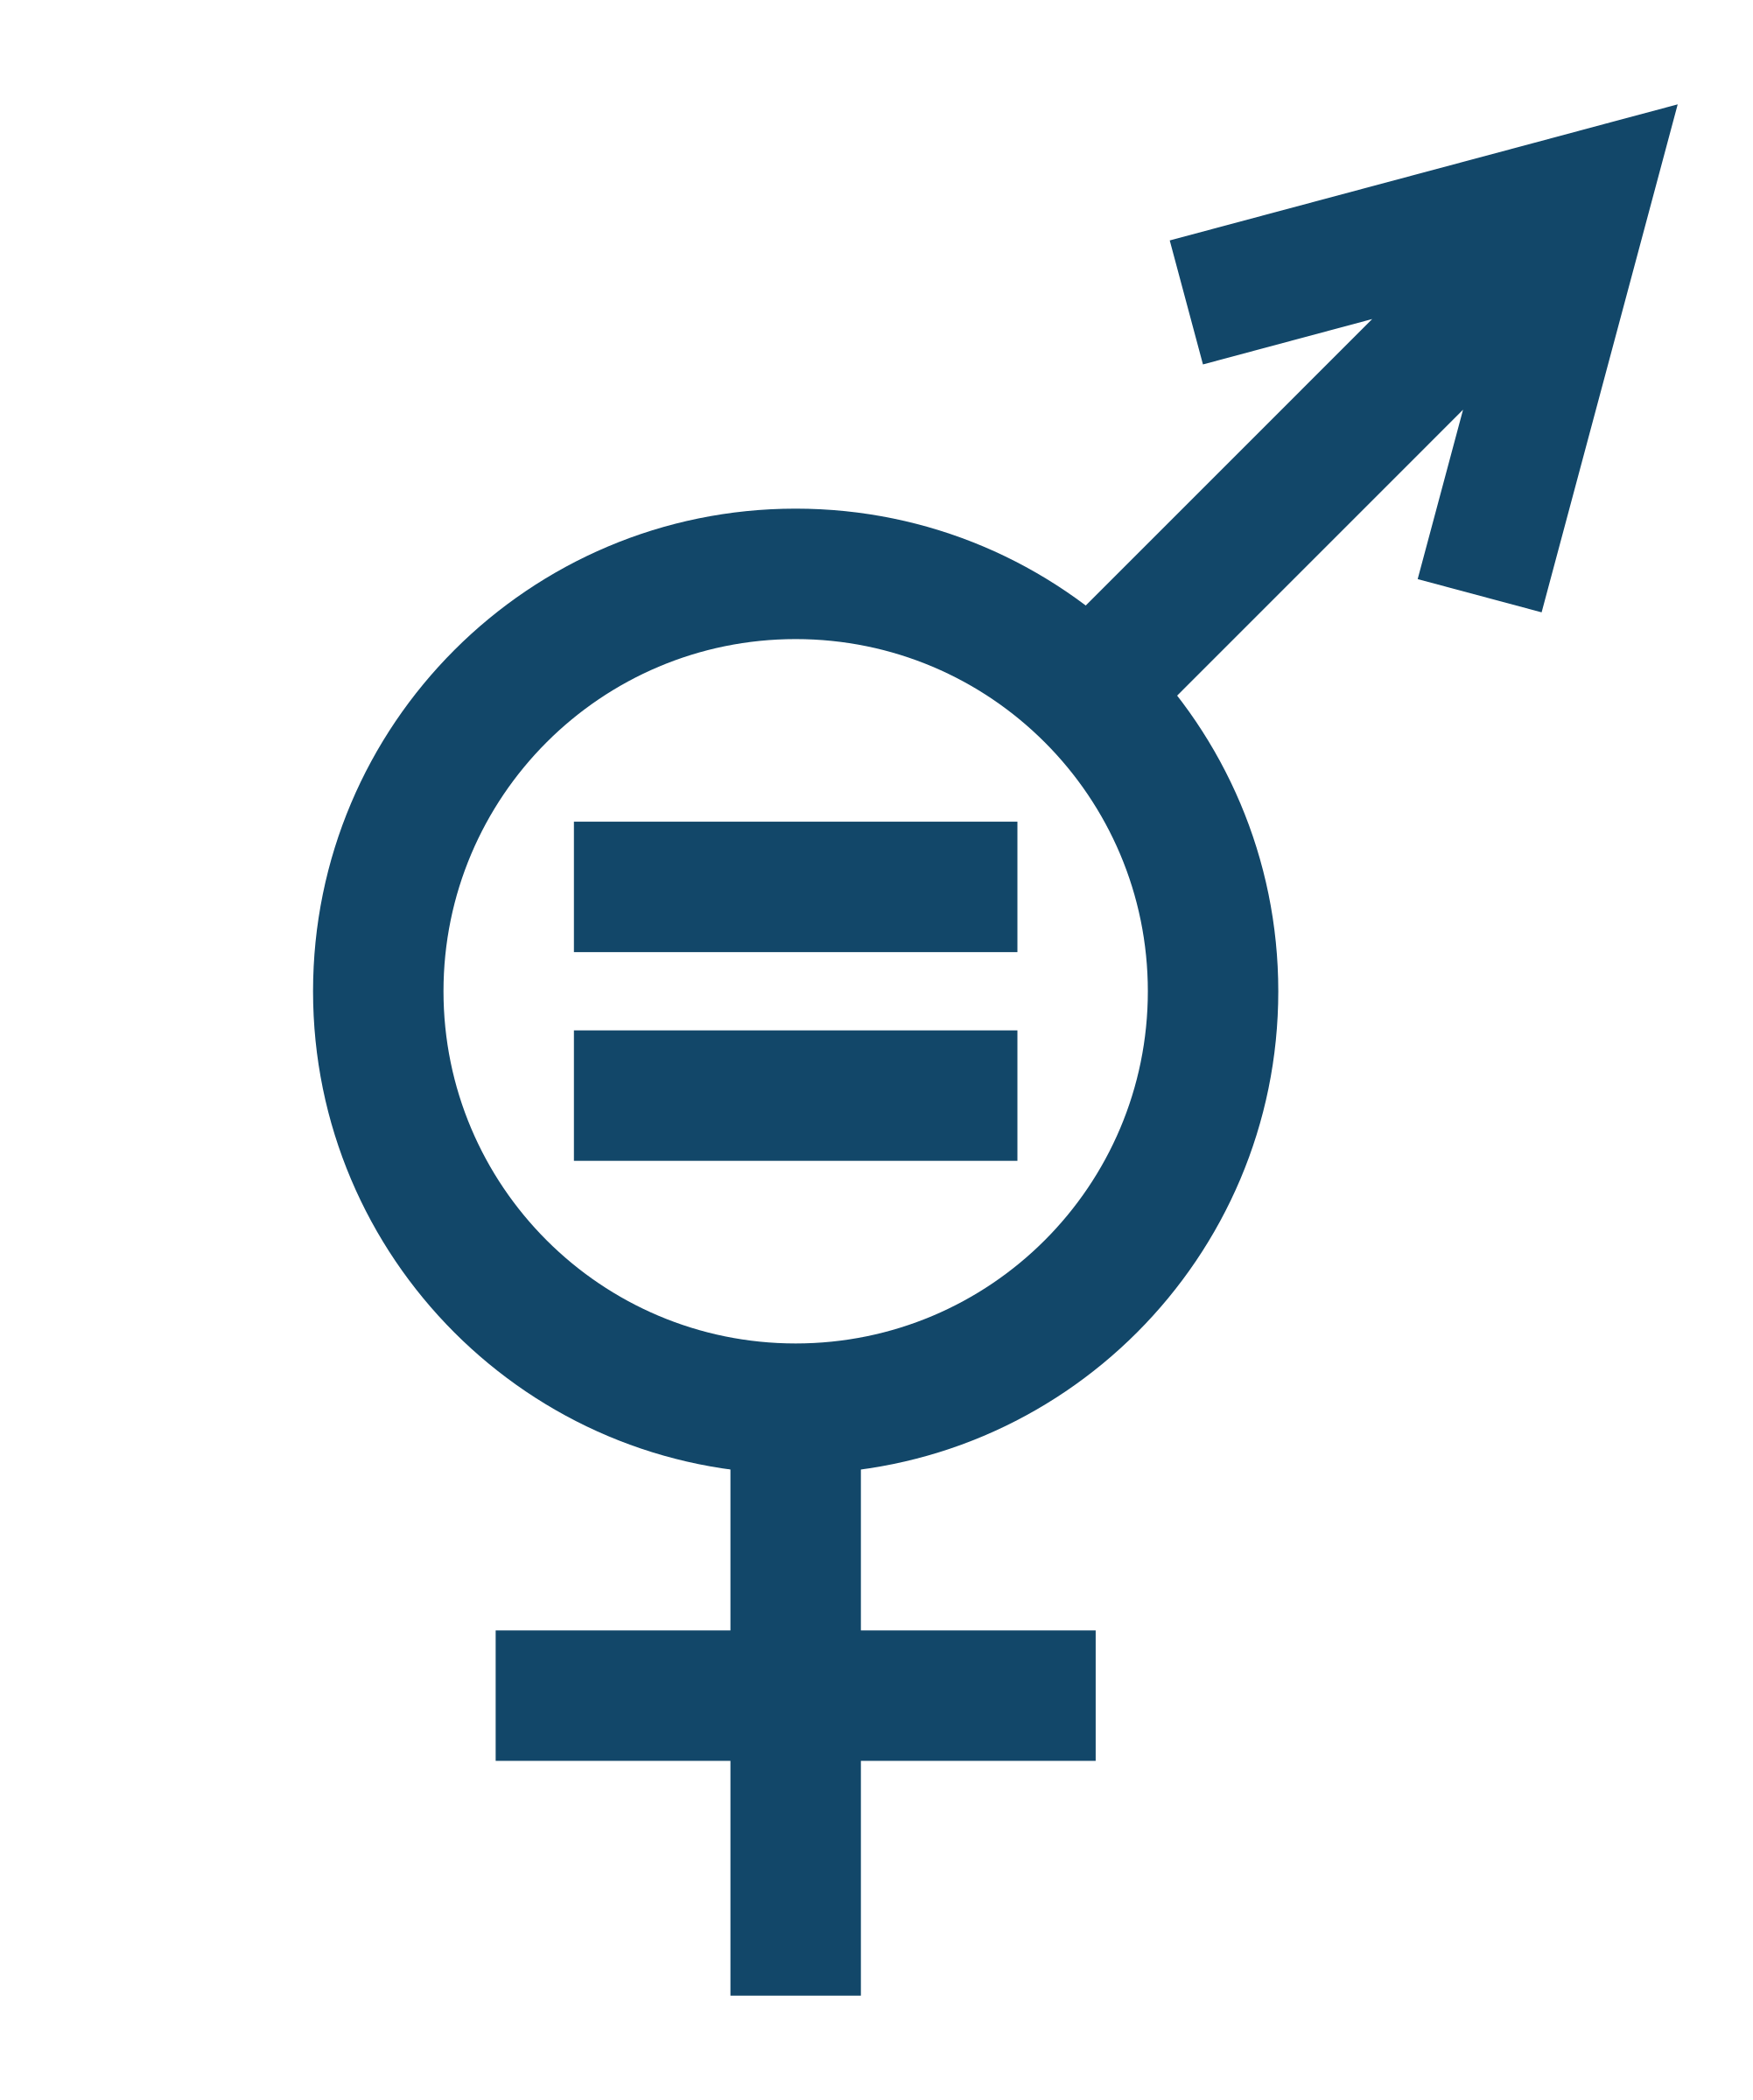 Genderequalitysymbolclipart Élections 